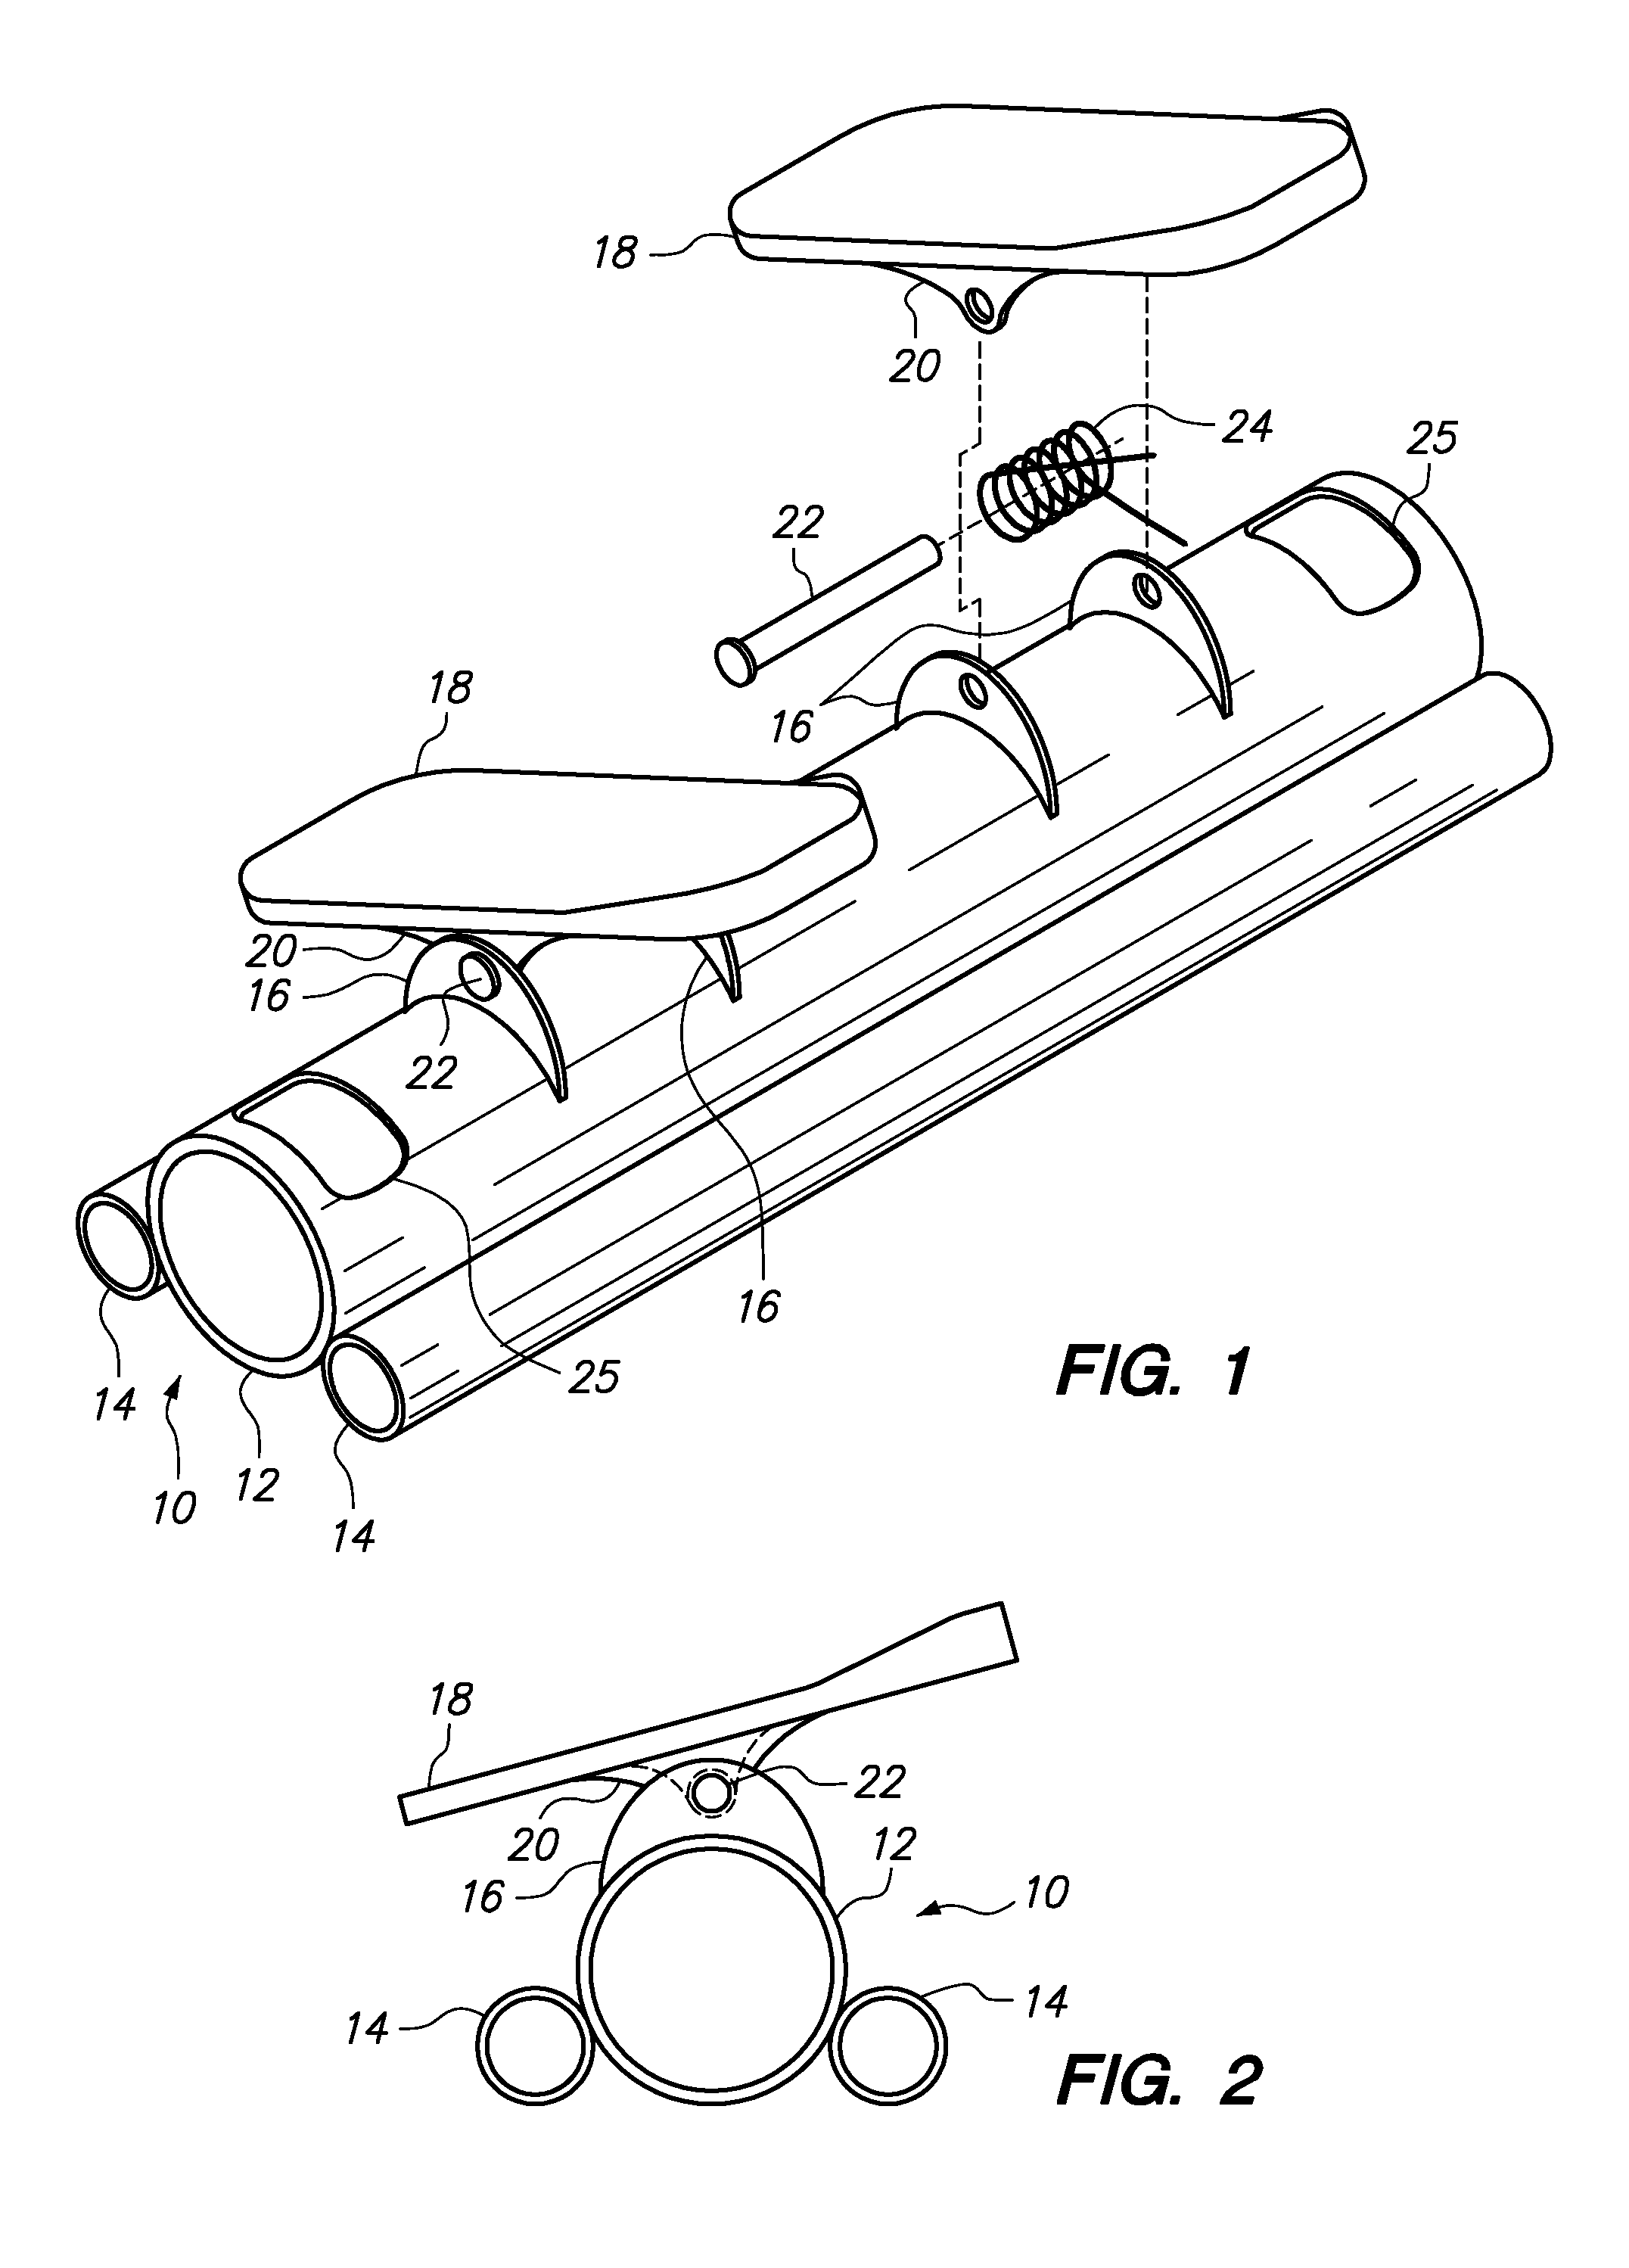 Exercise device with footboards having tubular support